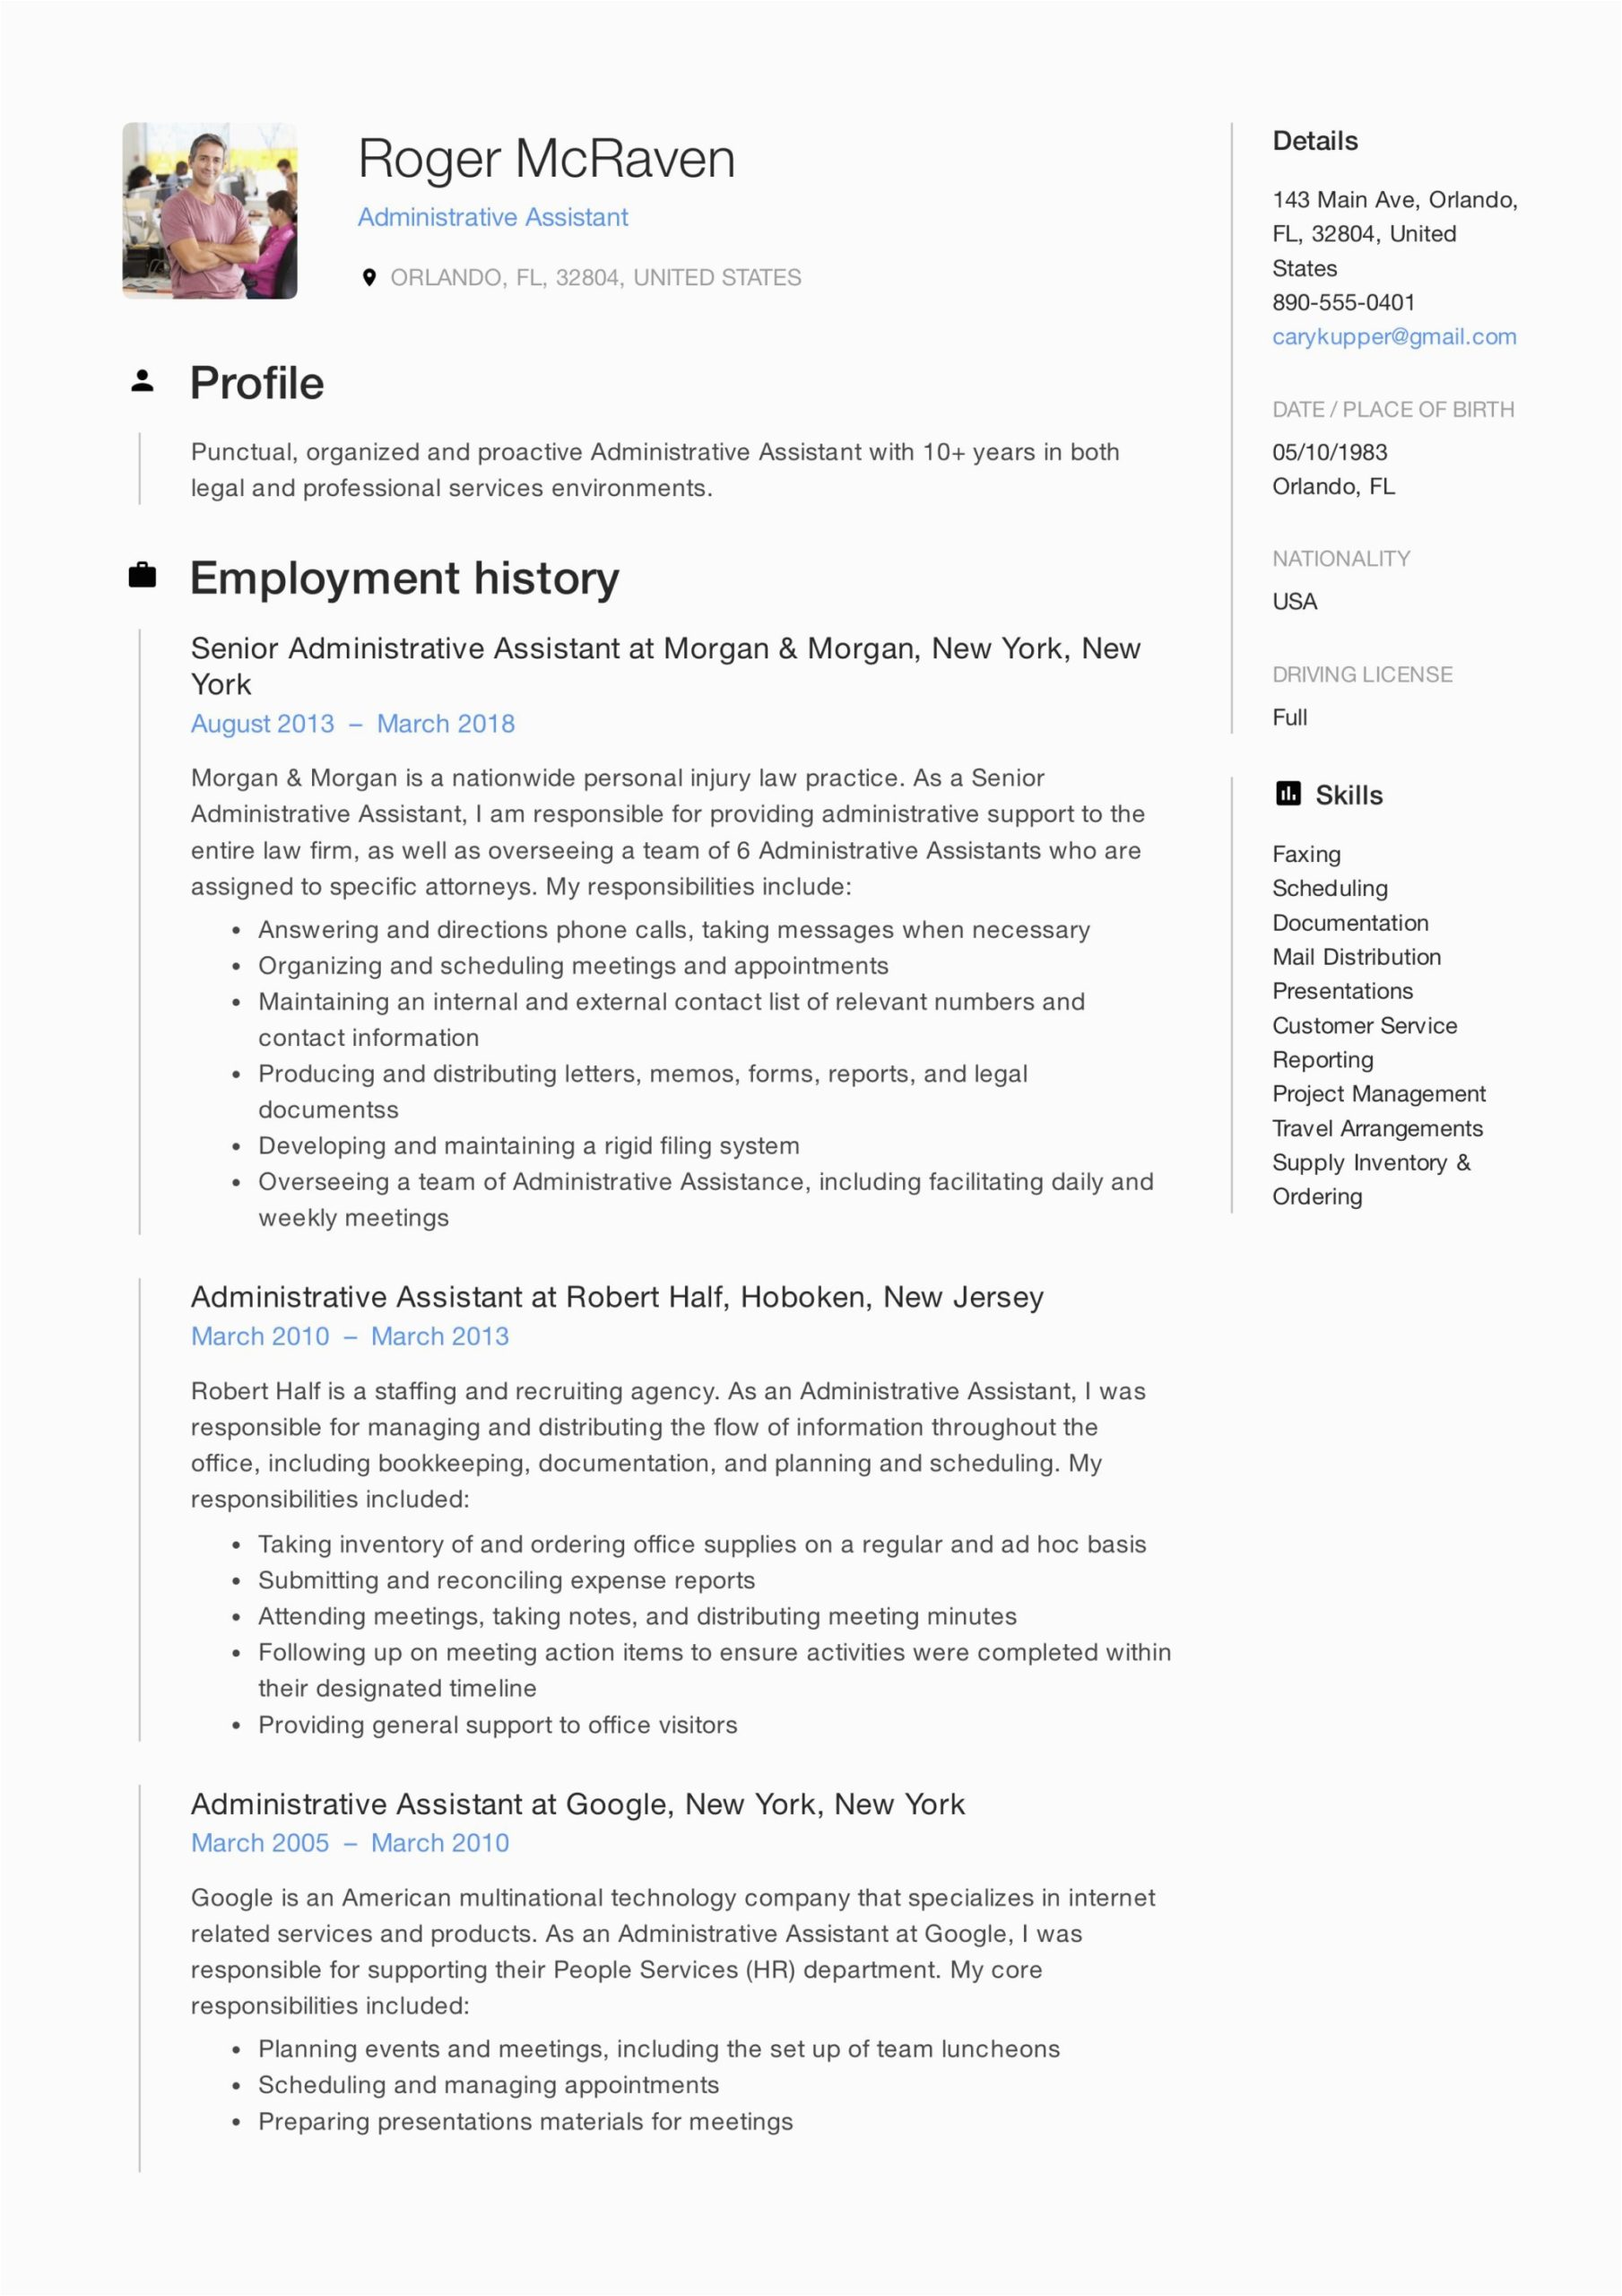 Resume Profile Samples for Admin assistant 19 Free Administrative assistant Resumes & Writing Guide